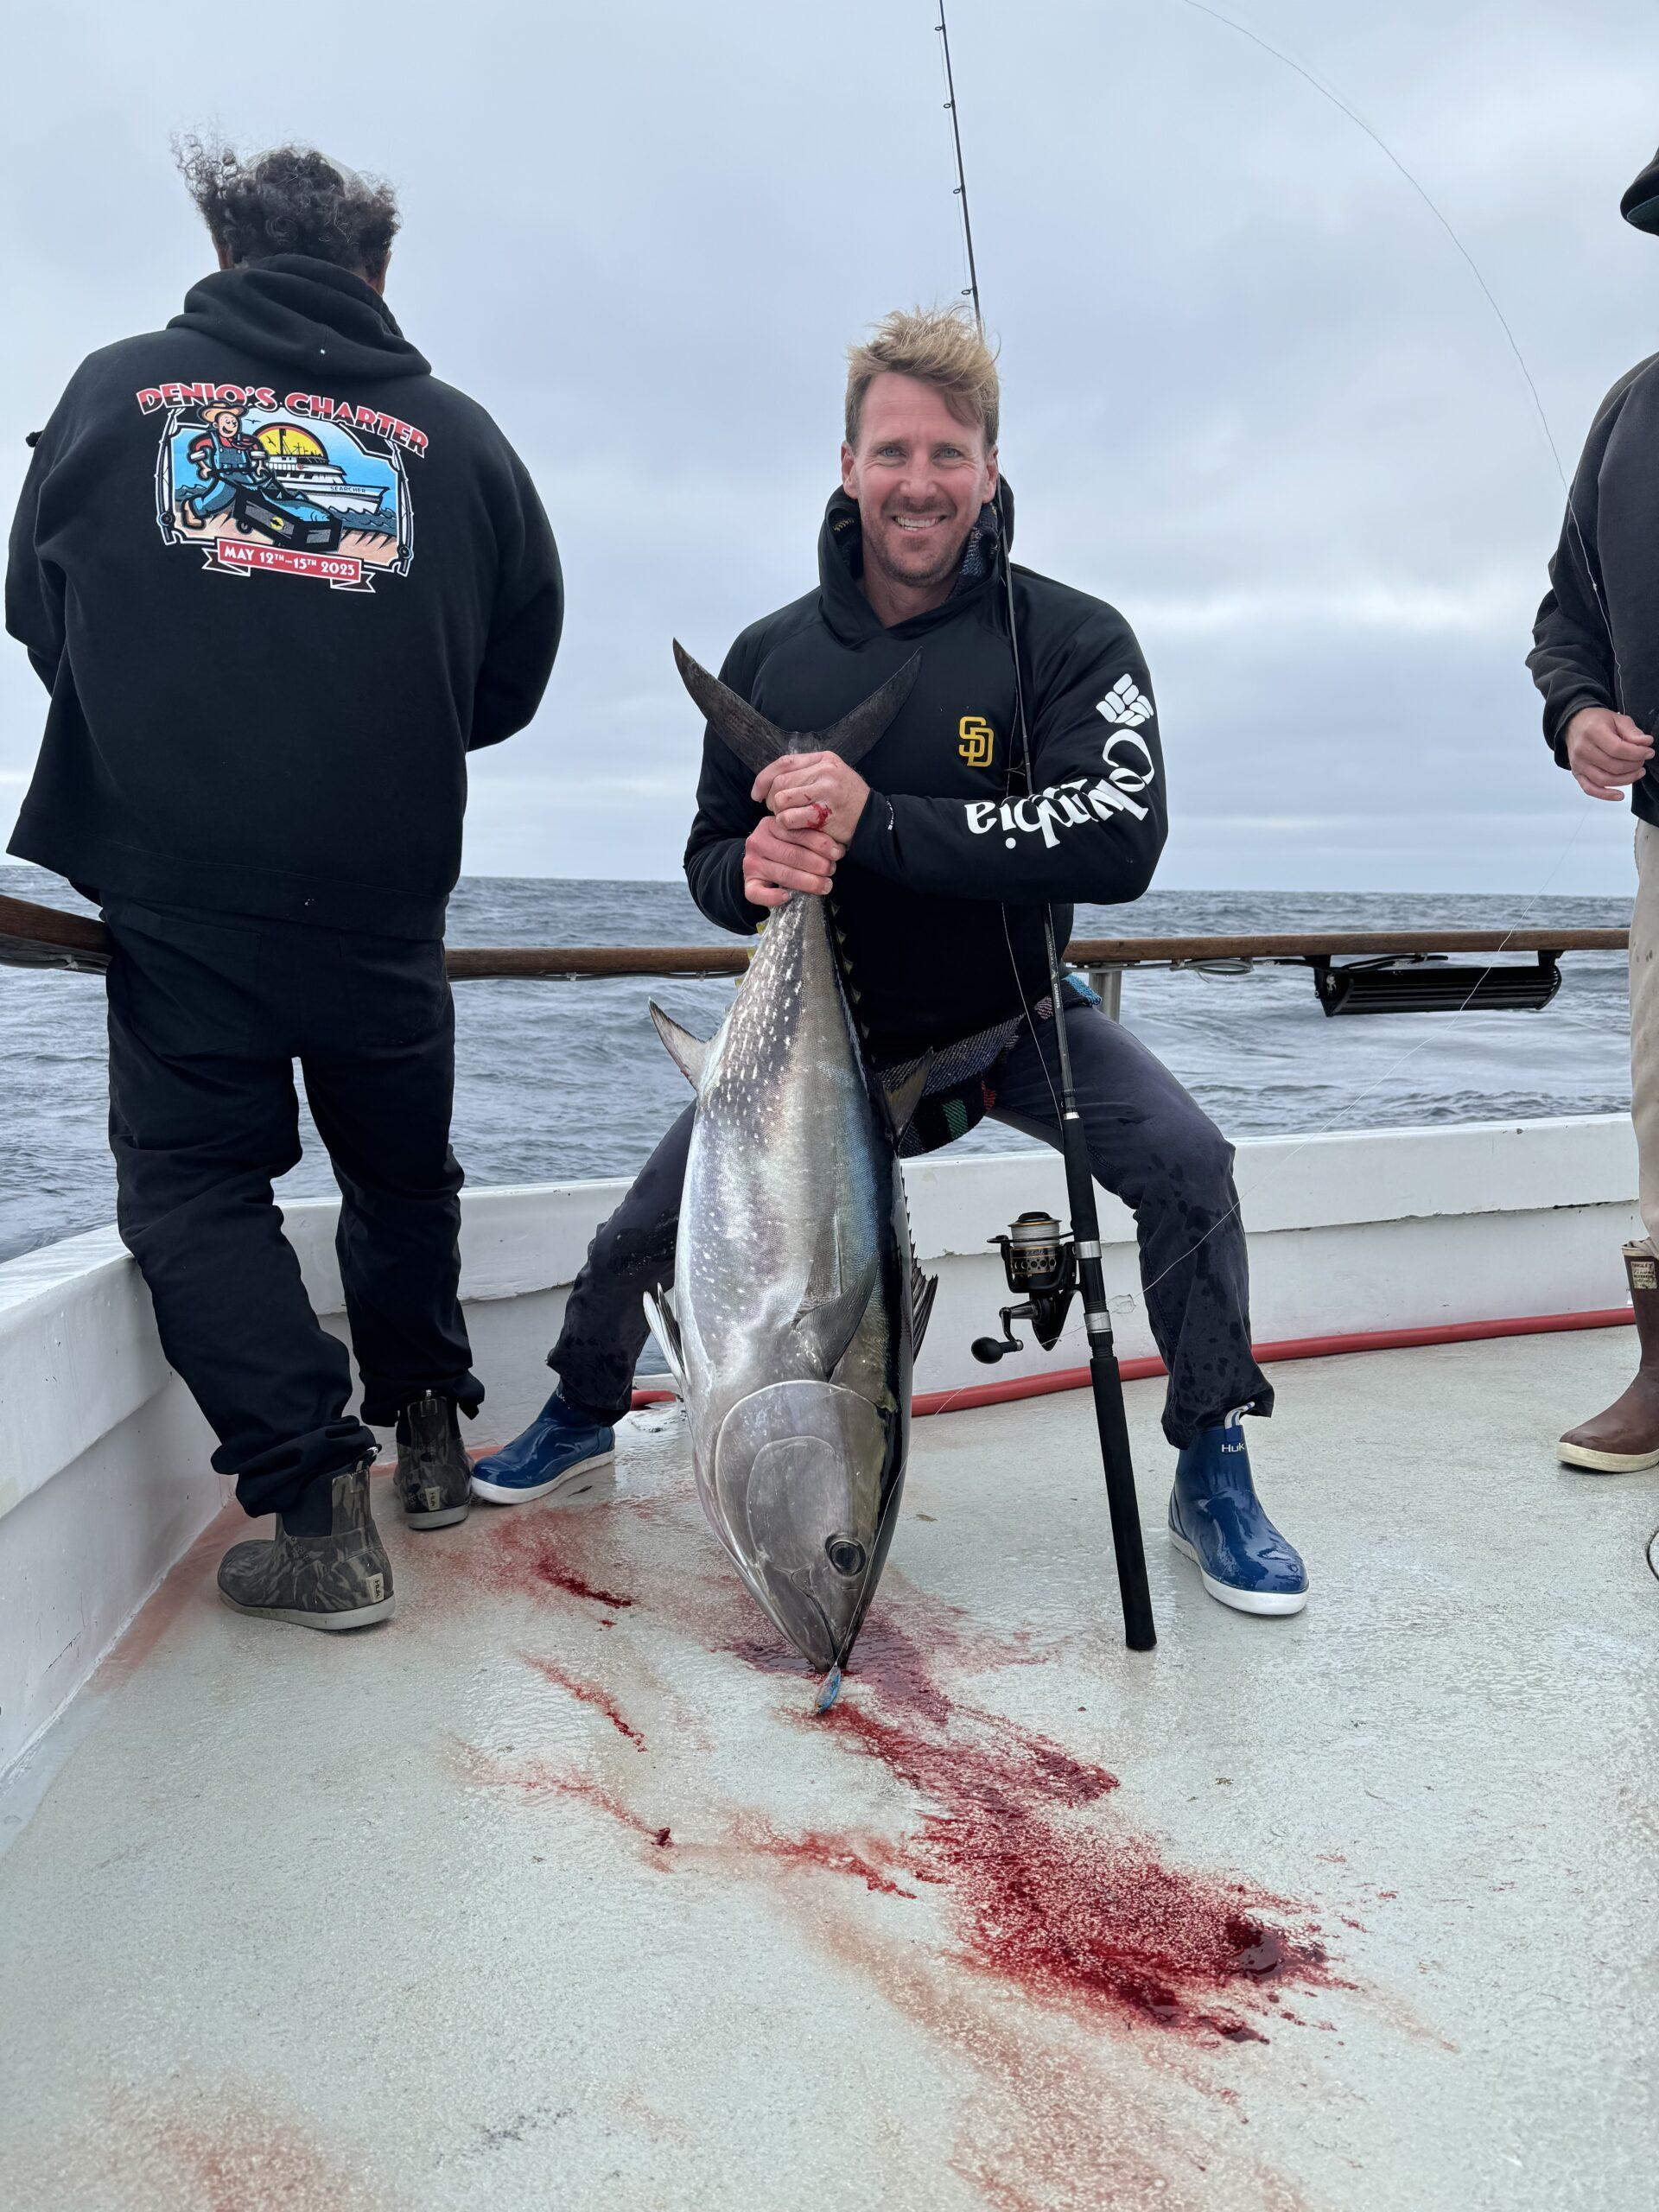 Bluefin caught by angler